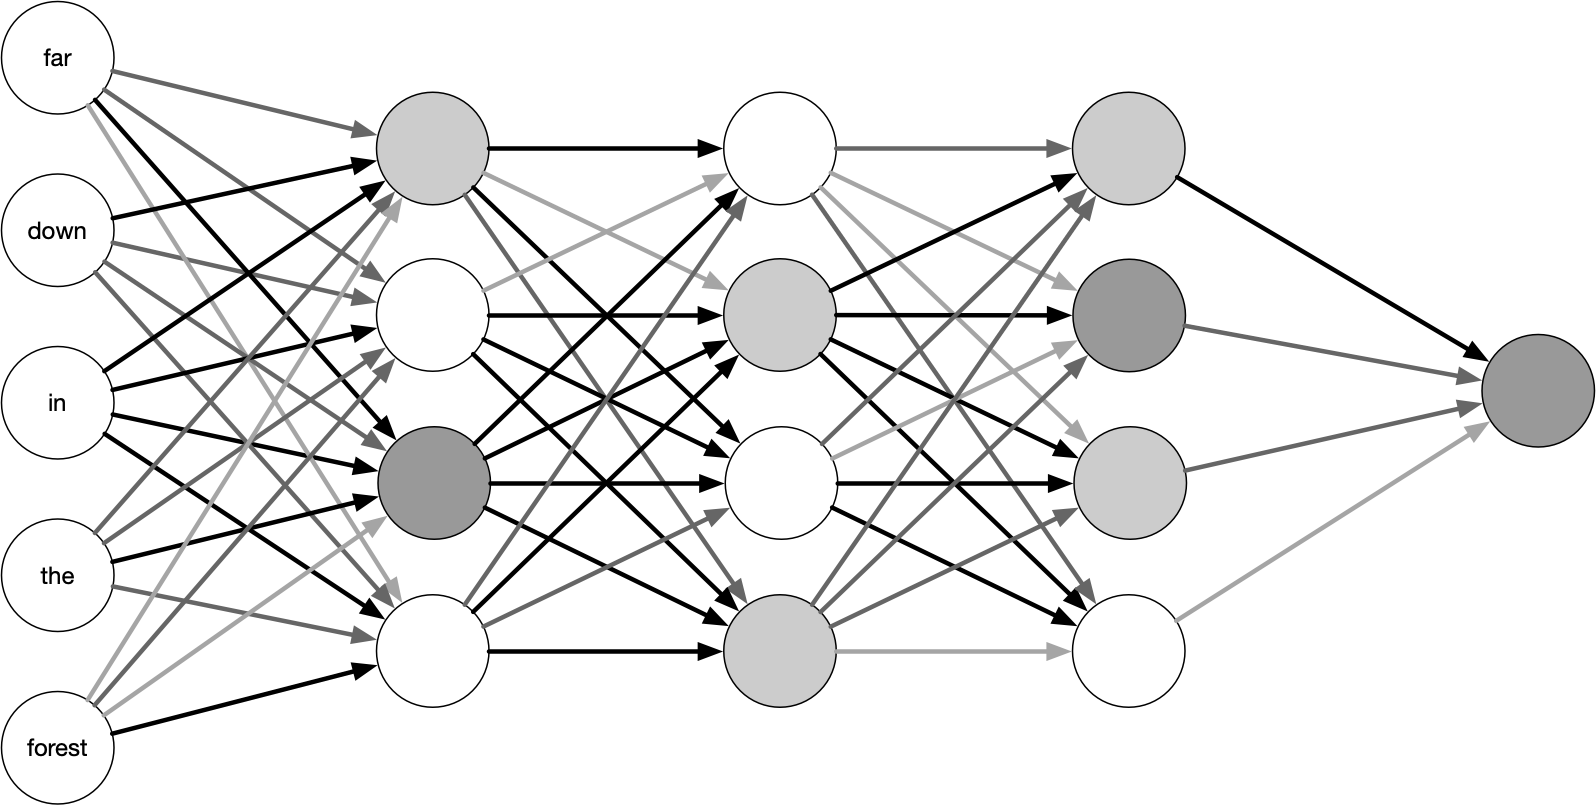 A high-level diagram of a feed-forward neural network. The lines connecting the nodes are shaded differently to illustrate the different weights connecting units.